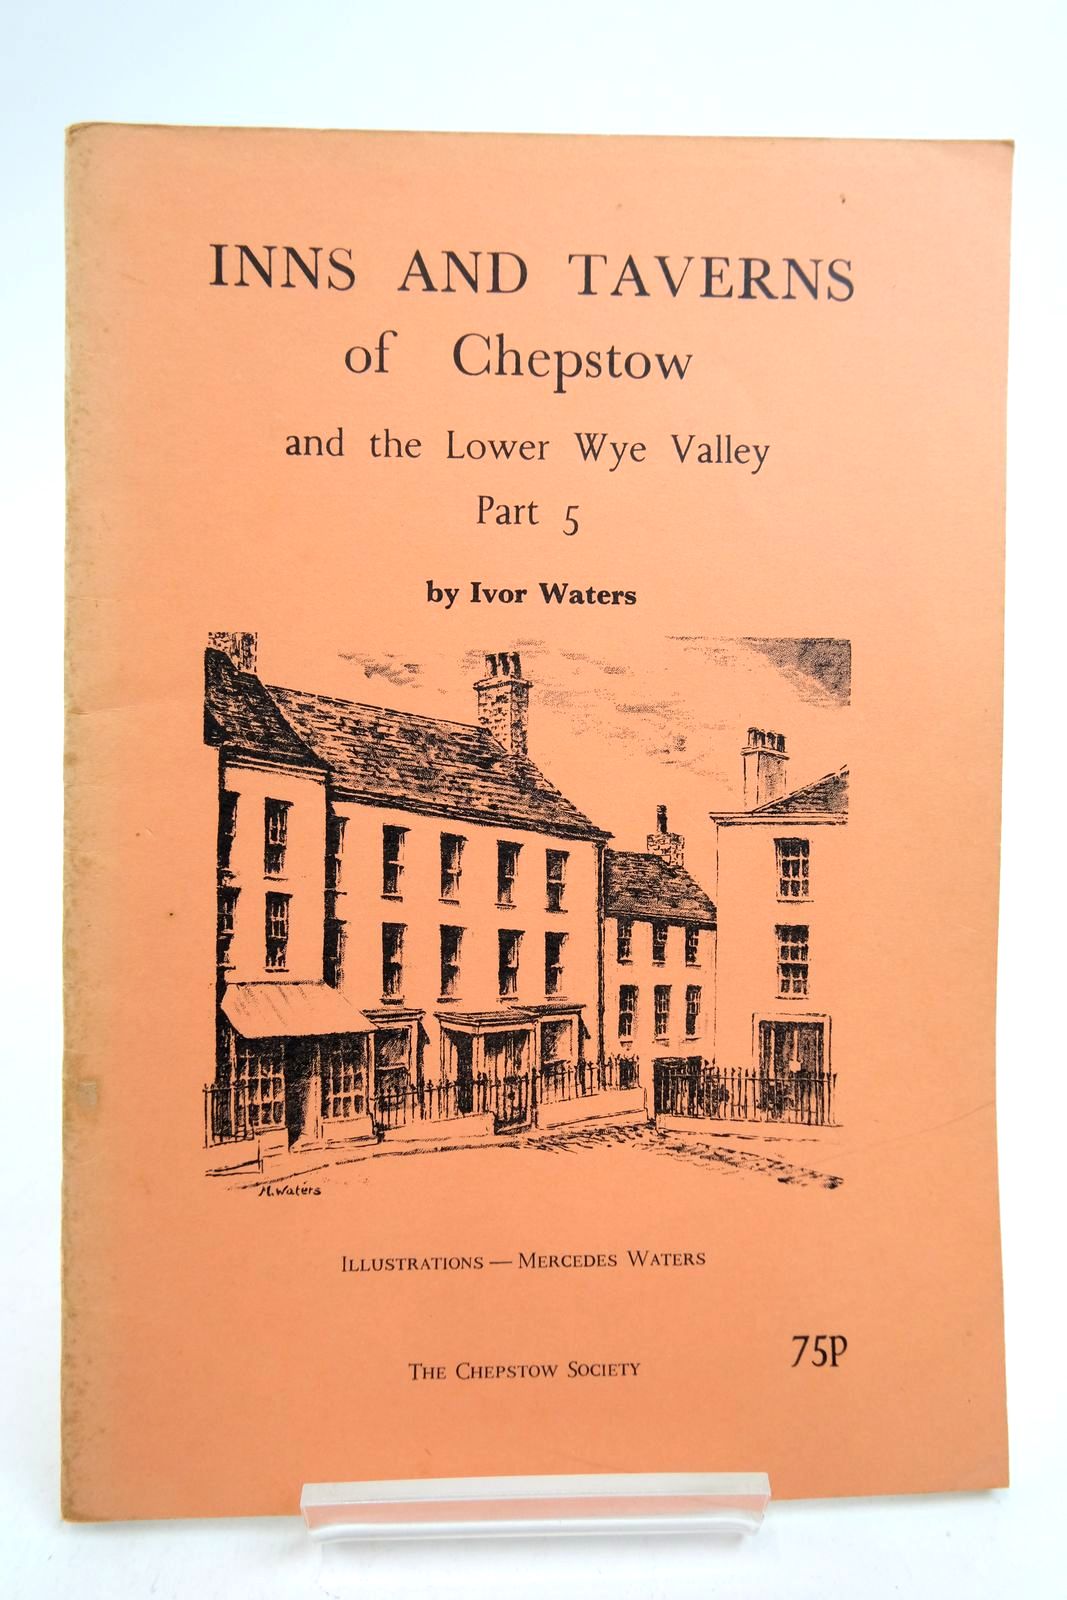 Photo of INNS AND TAVERNS OF CHEPSTOW AND THE LOWER WYE VALLEY PART 5 written by Waters, Ivor illustrated by Waters, Mercedes published by The Chepstow Society (STOCK CODE: 2140175)  for sale by Stella & Rose's Books